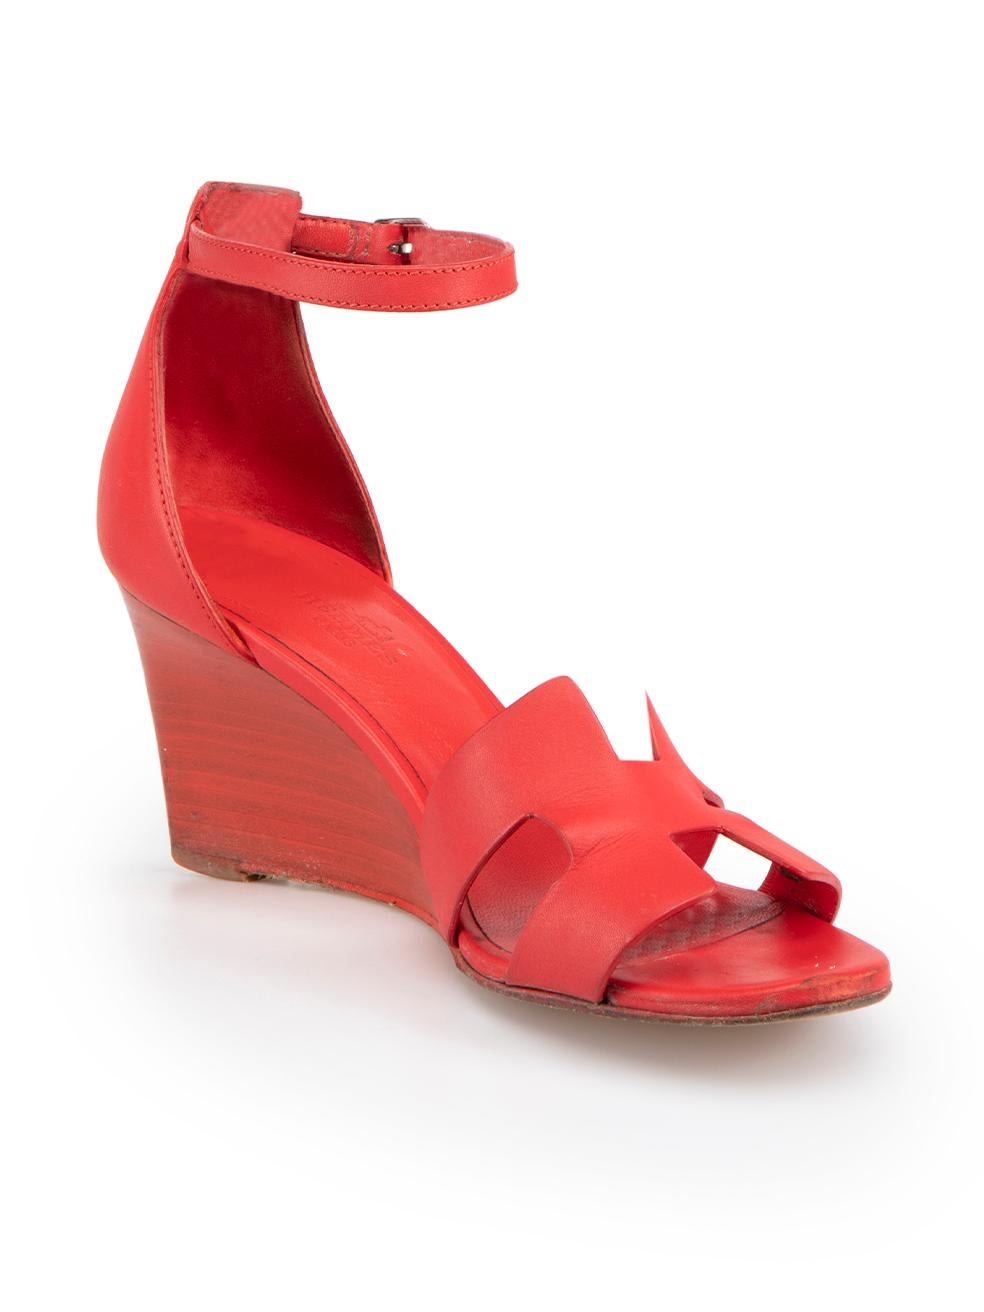 CONDITION is Good. General wear to shoes is evident. Moderate signs of wear to both shoe heels, wedges, uppers and footbeds with dark marks, scratches and abrasions on this used Hermès designer resale item.
 
 Details
 Legend
 Red
 Leather
 Wedge